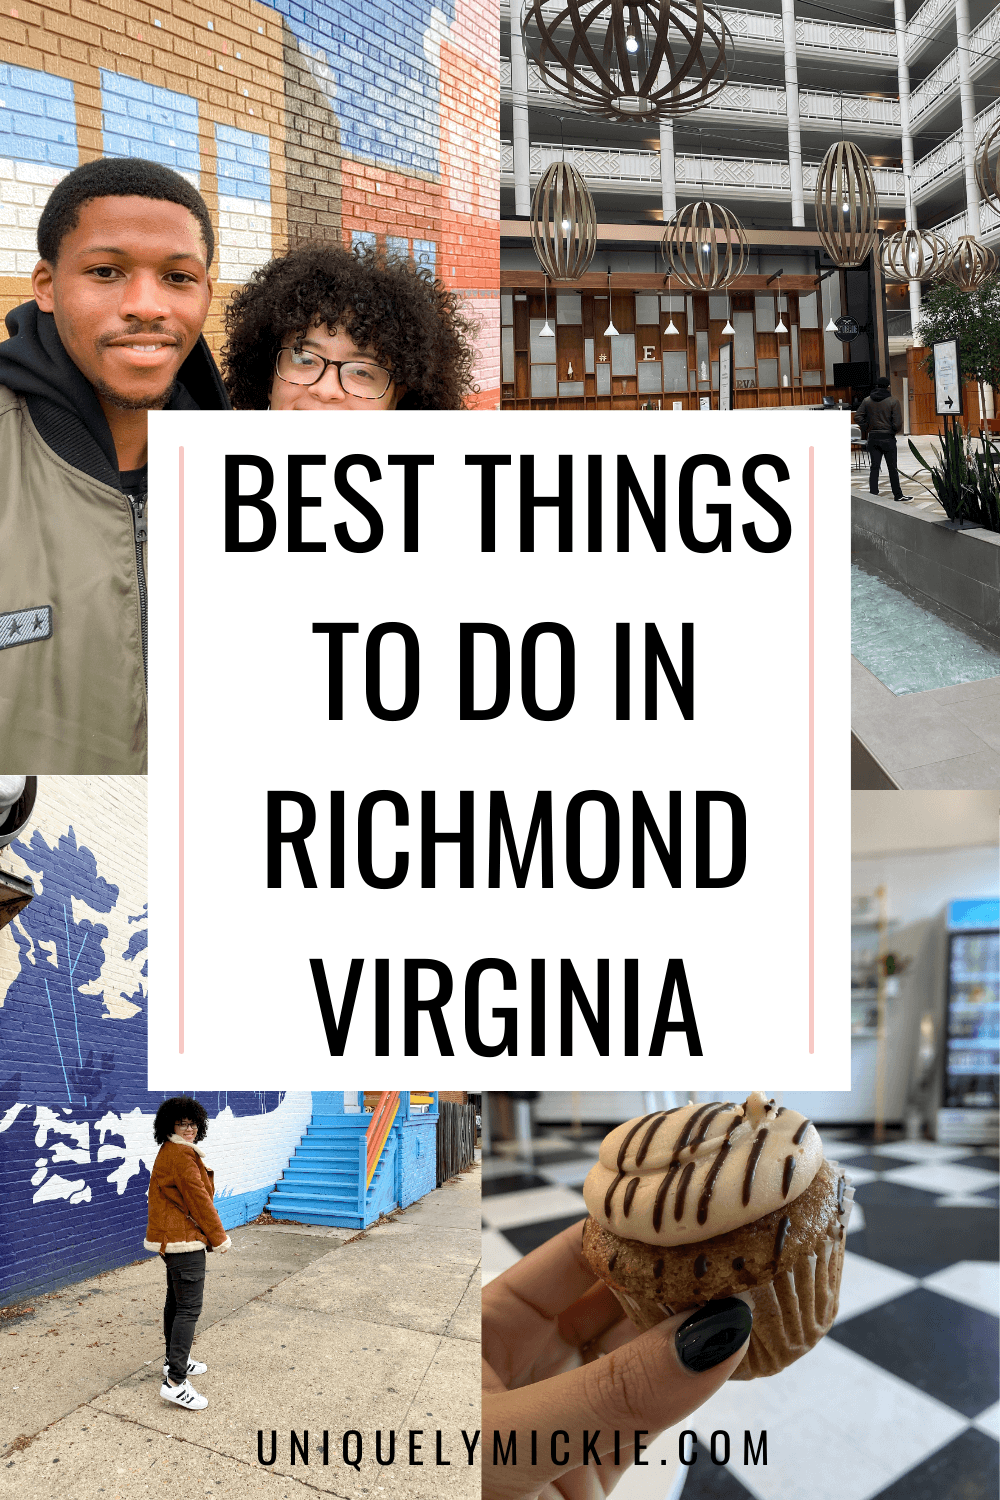 Heading to Richmond, VA for a weekend getaway? Check out this blog post for some inspiration of where to eat, stay, and explore in the beautiful city of Richmond, VA. 